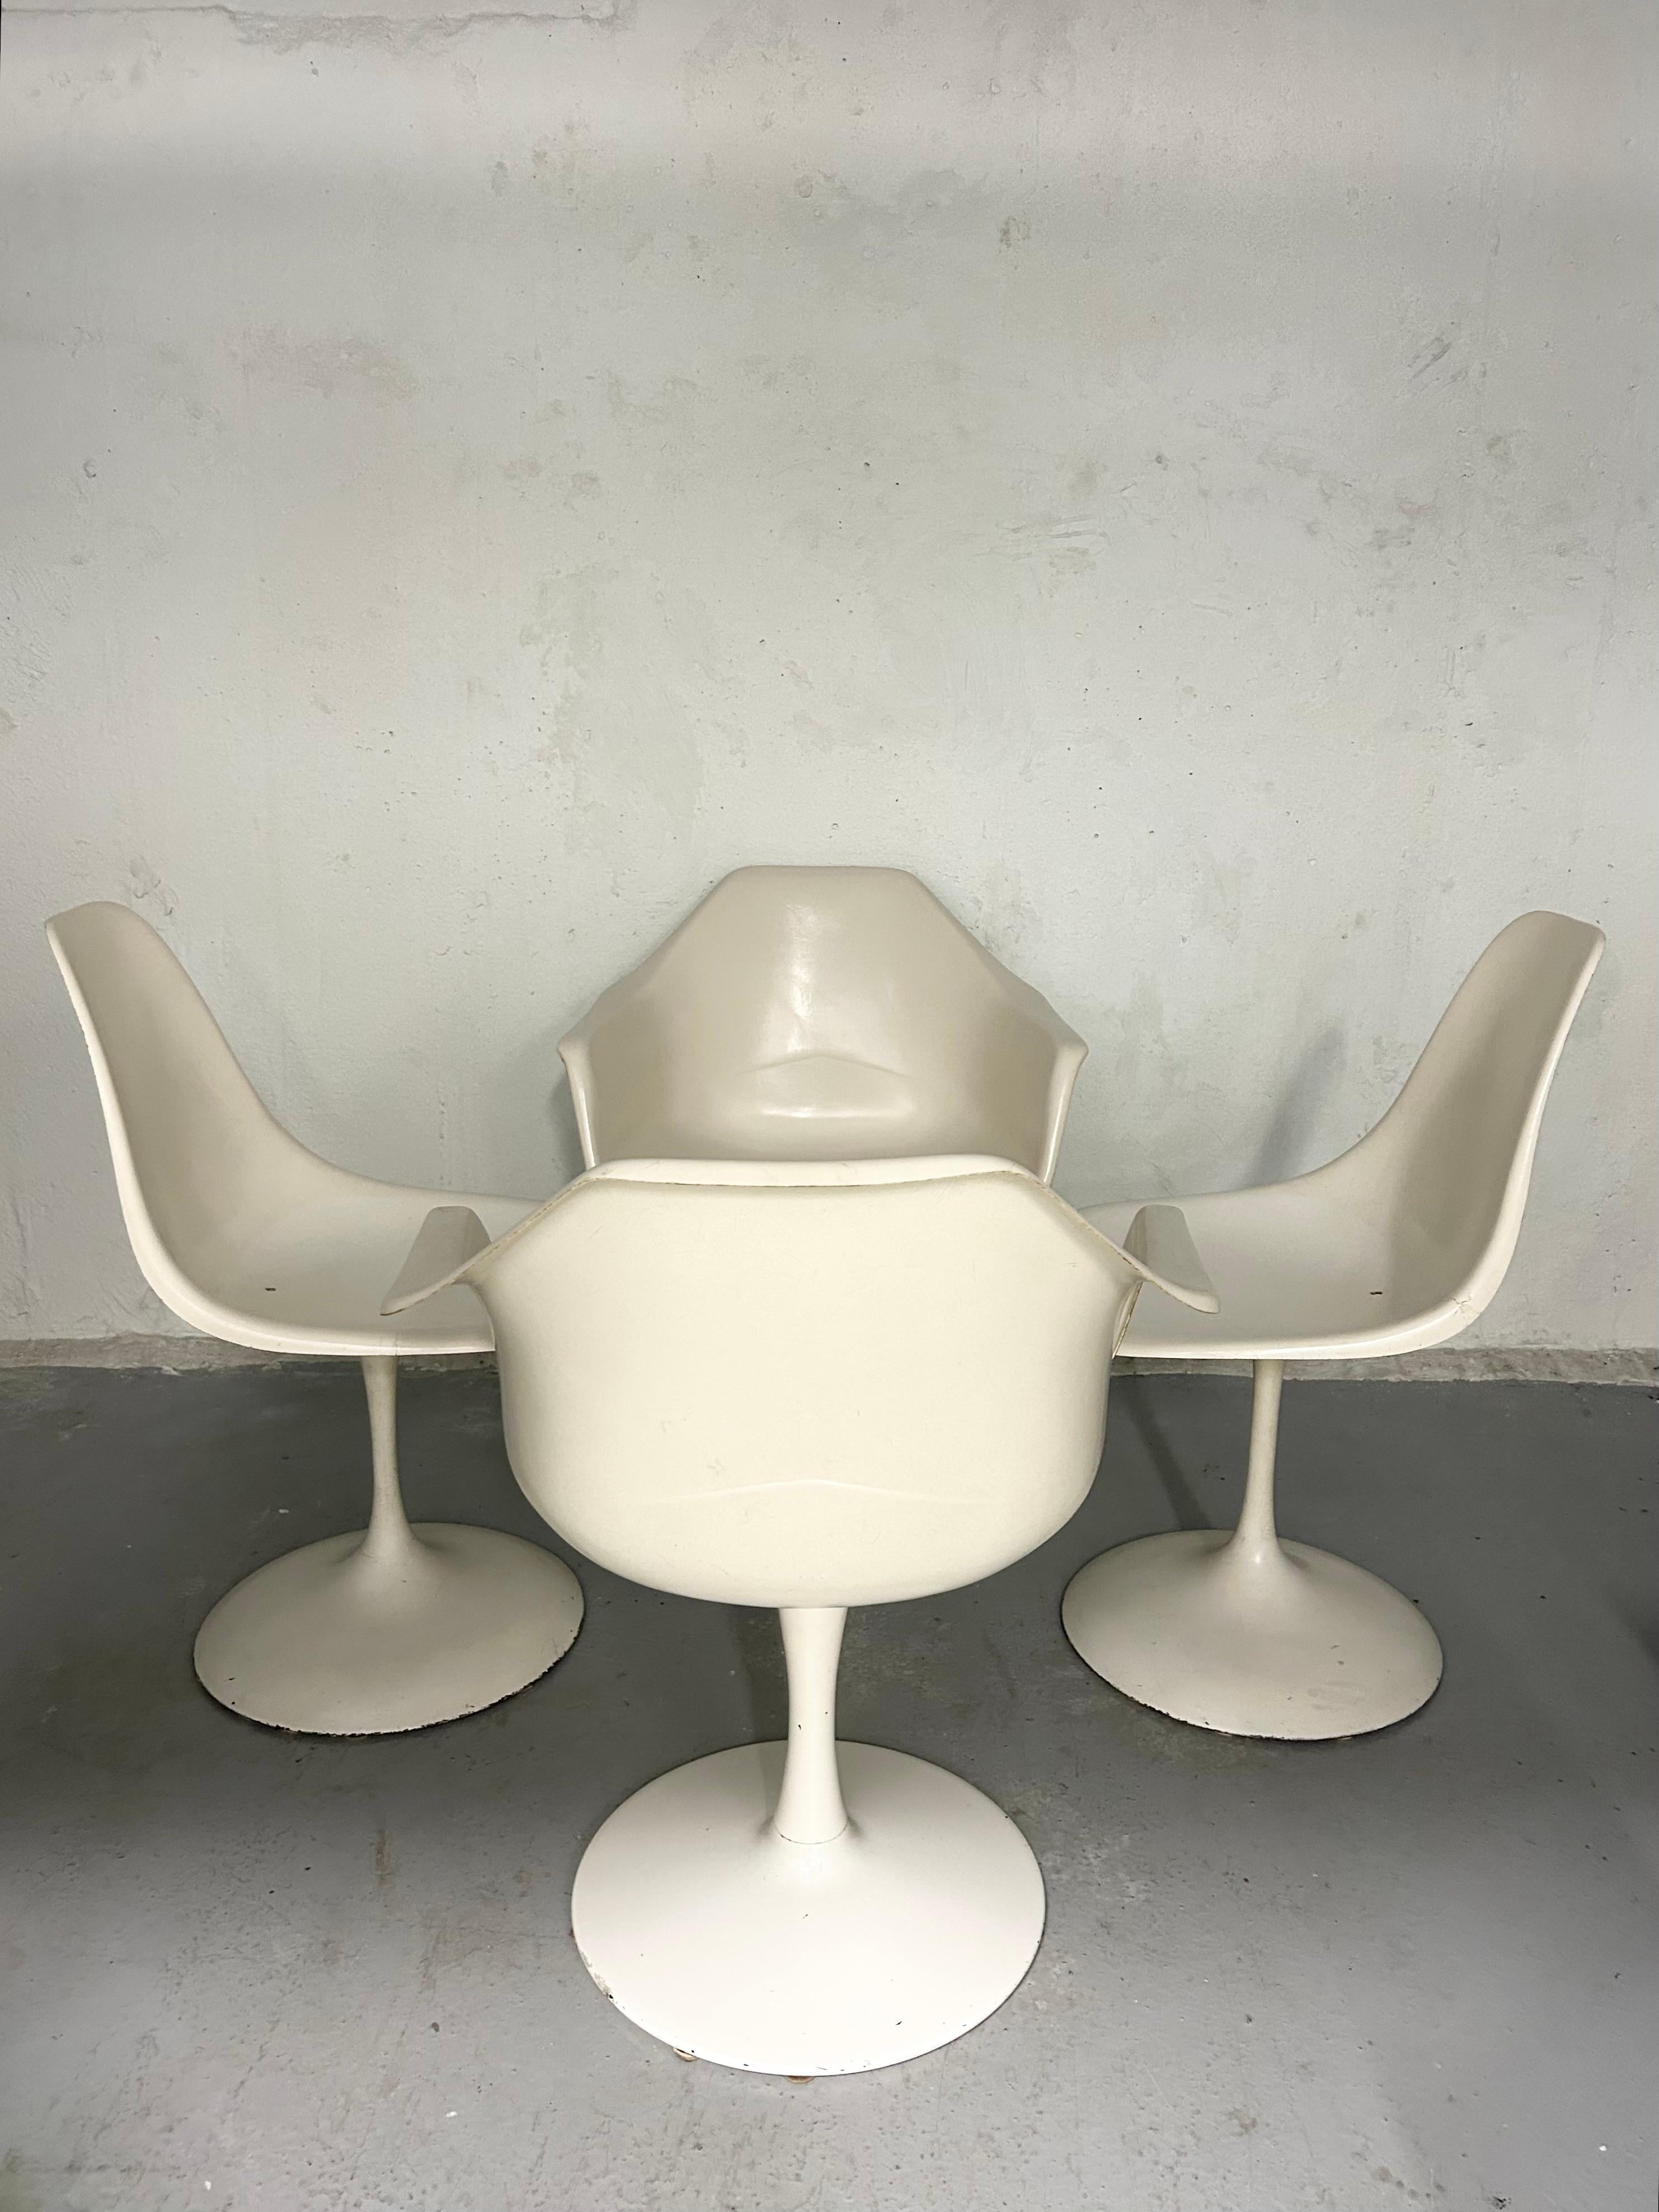 Vintage space age fiberglass swivel tulip chairs. In the style of Eero Saarinen. Manufacturer unknown. In good vintage condition. The two chairs without armrests both have a chip on one side edge. One of the chairs with armrests has more wear to the